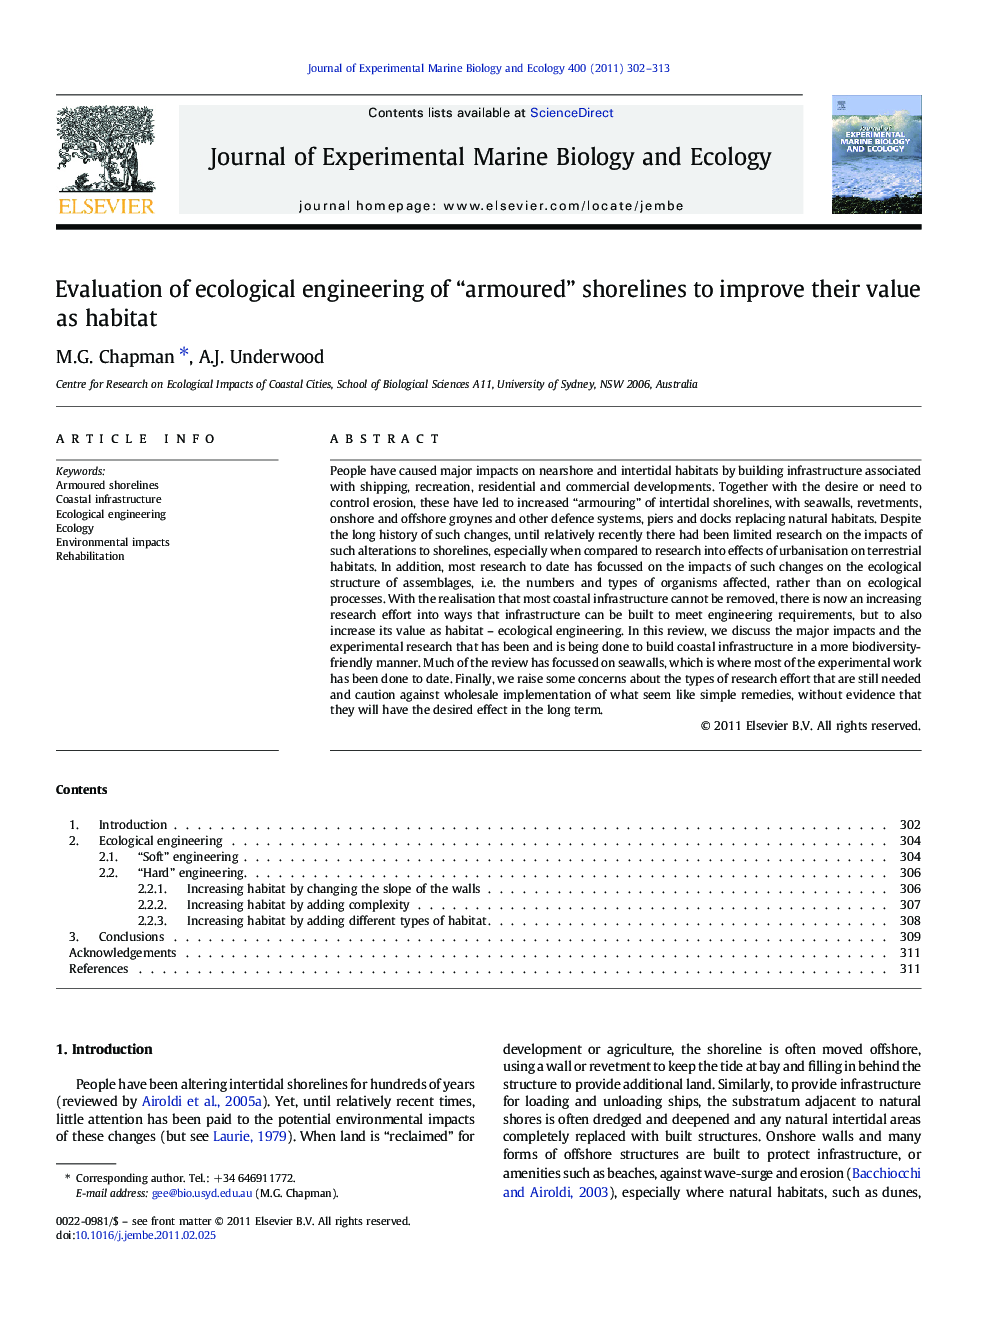 Evaluation of ecological engineering of “armoured” shorelines to improve their value as habitat